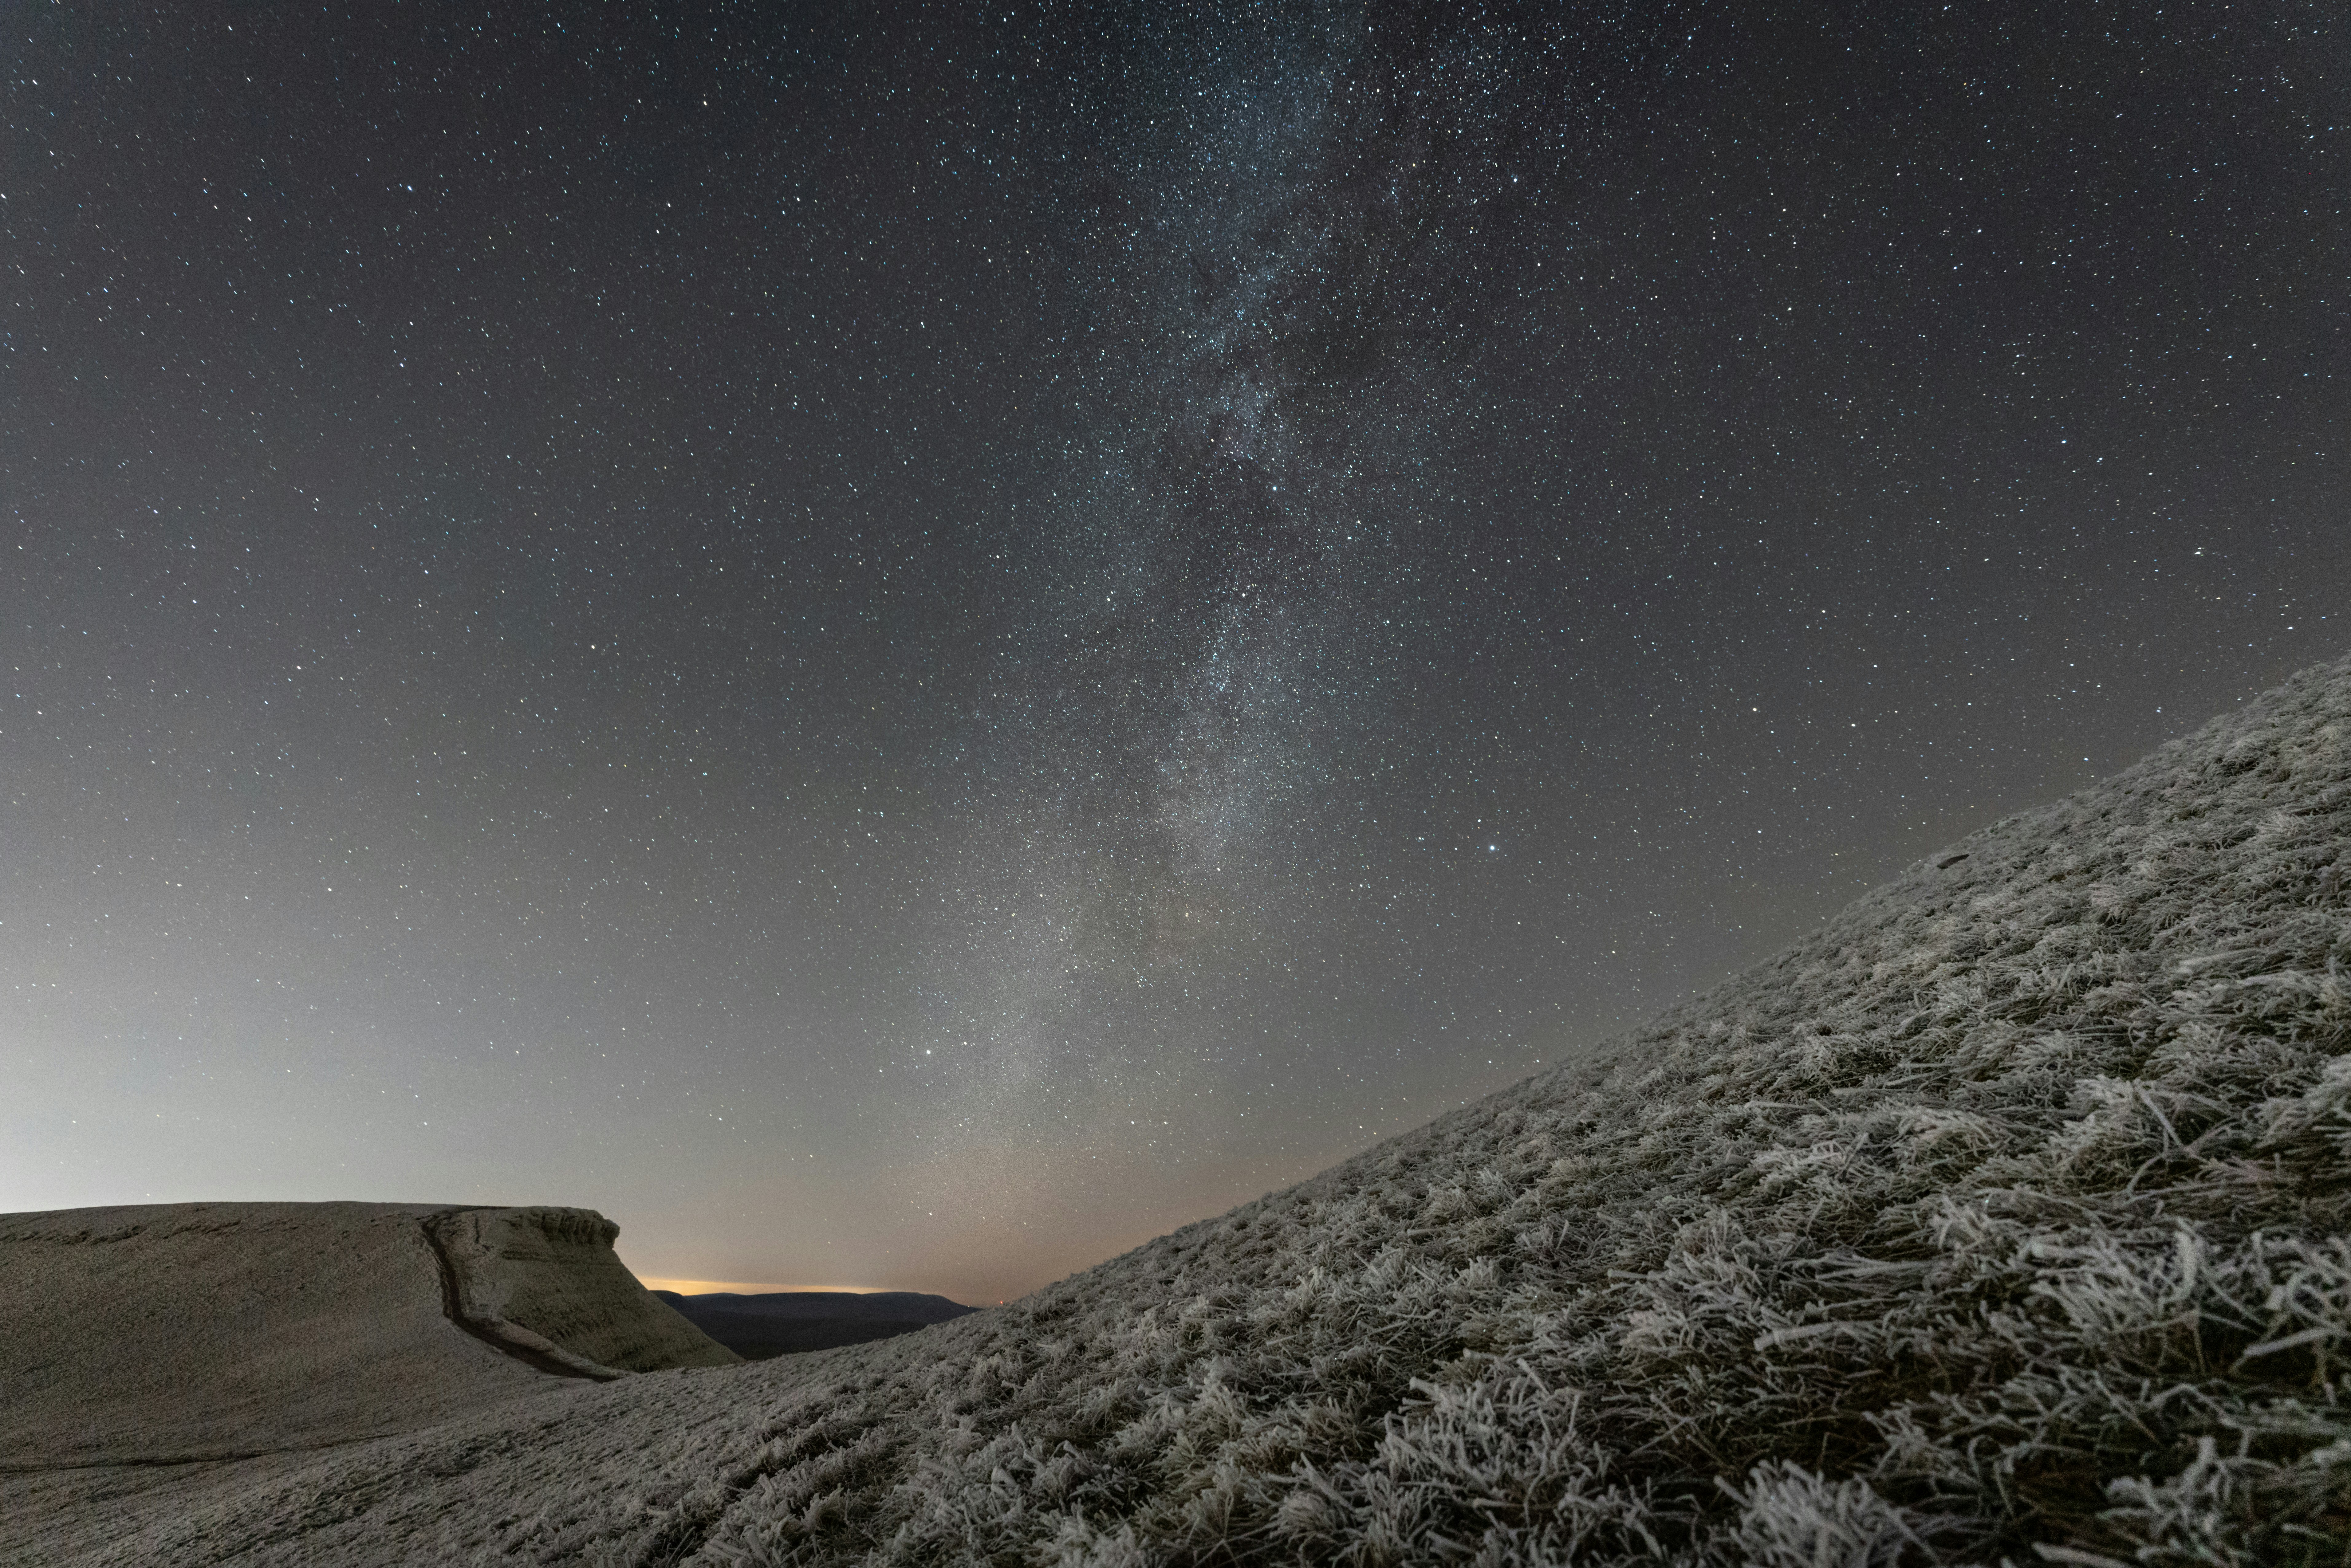 A wintery shot of the Galactic core nestled between Corn Du and Pen Y Fan. The highest peaks in South Wales. 